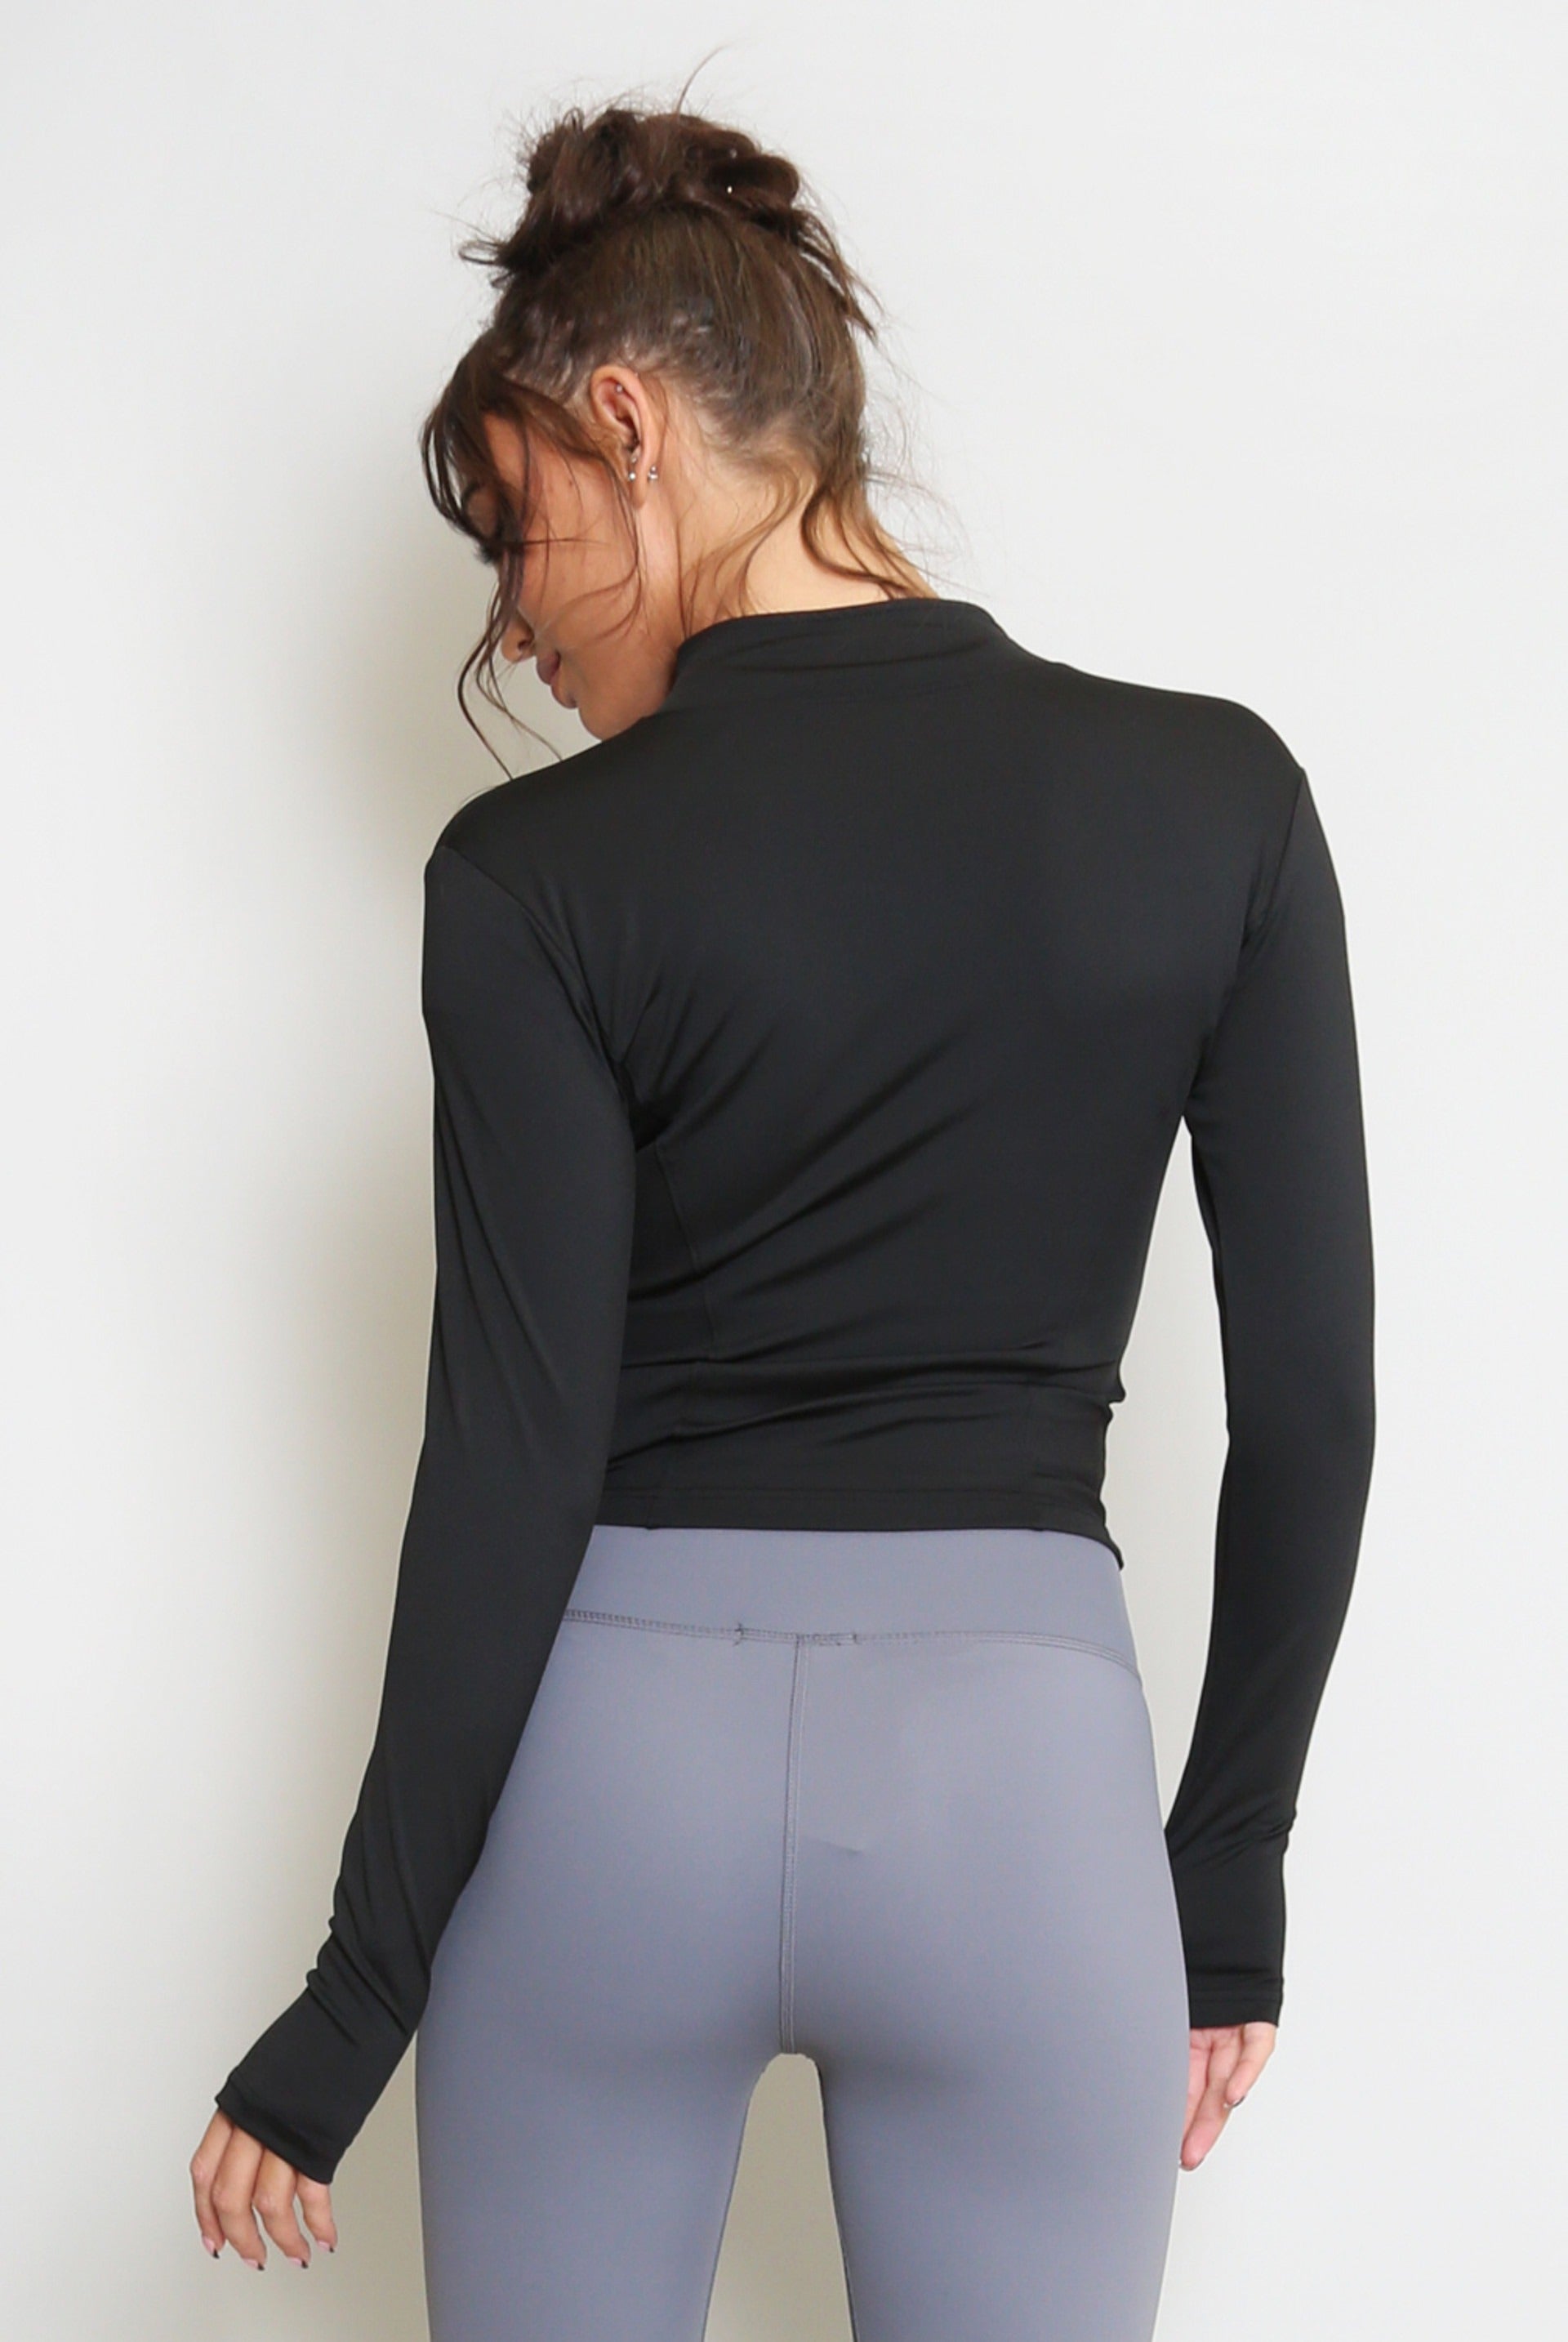 Black Fitted Energy Long Sleeve Gym Top - Mila - Storm Desire